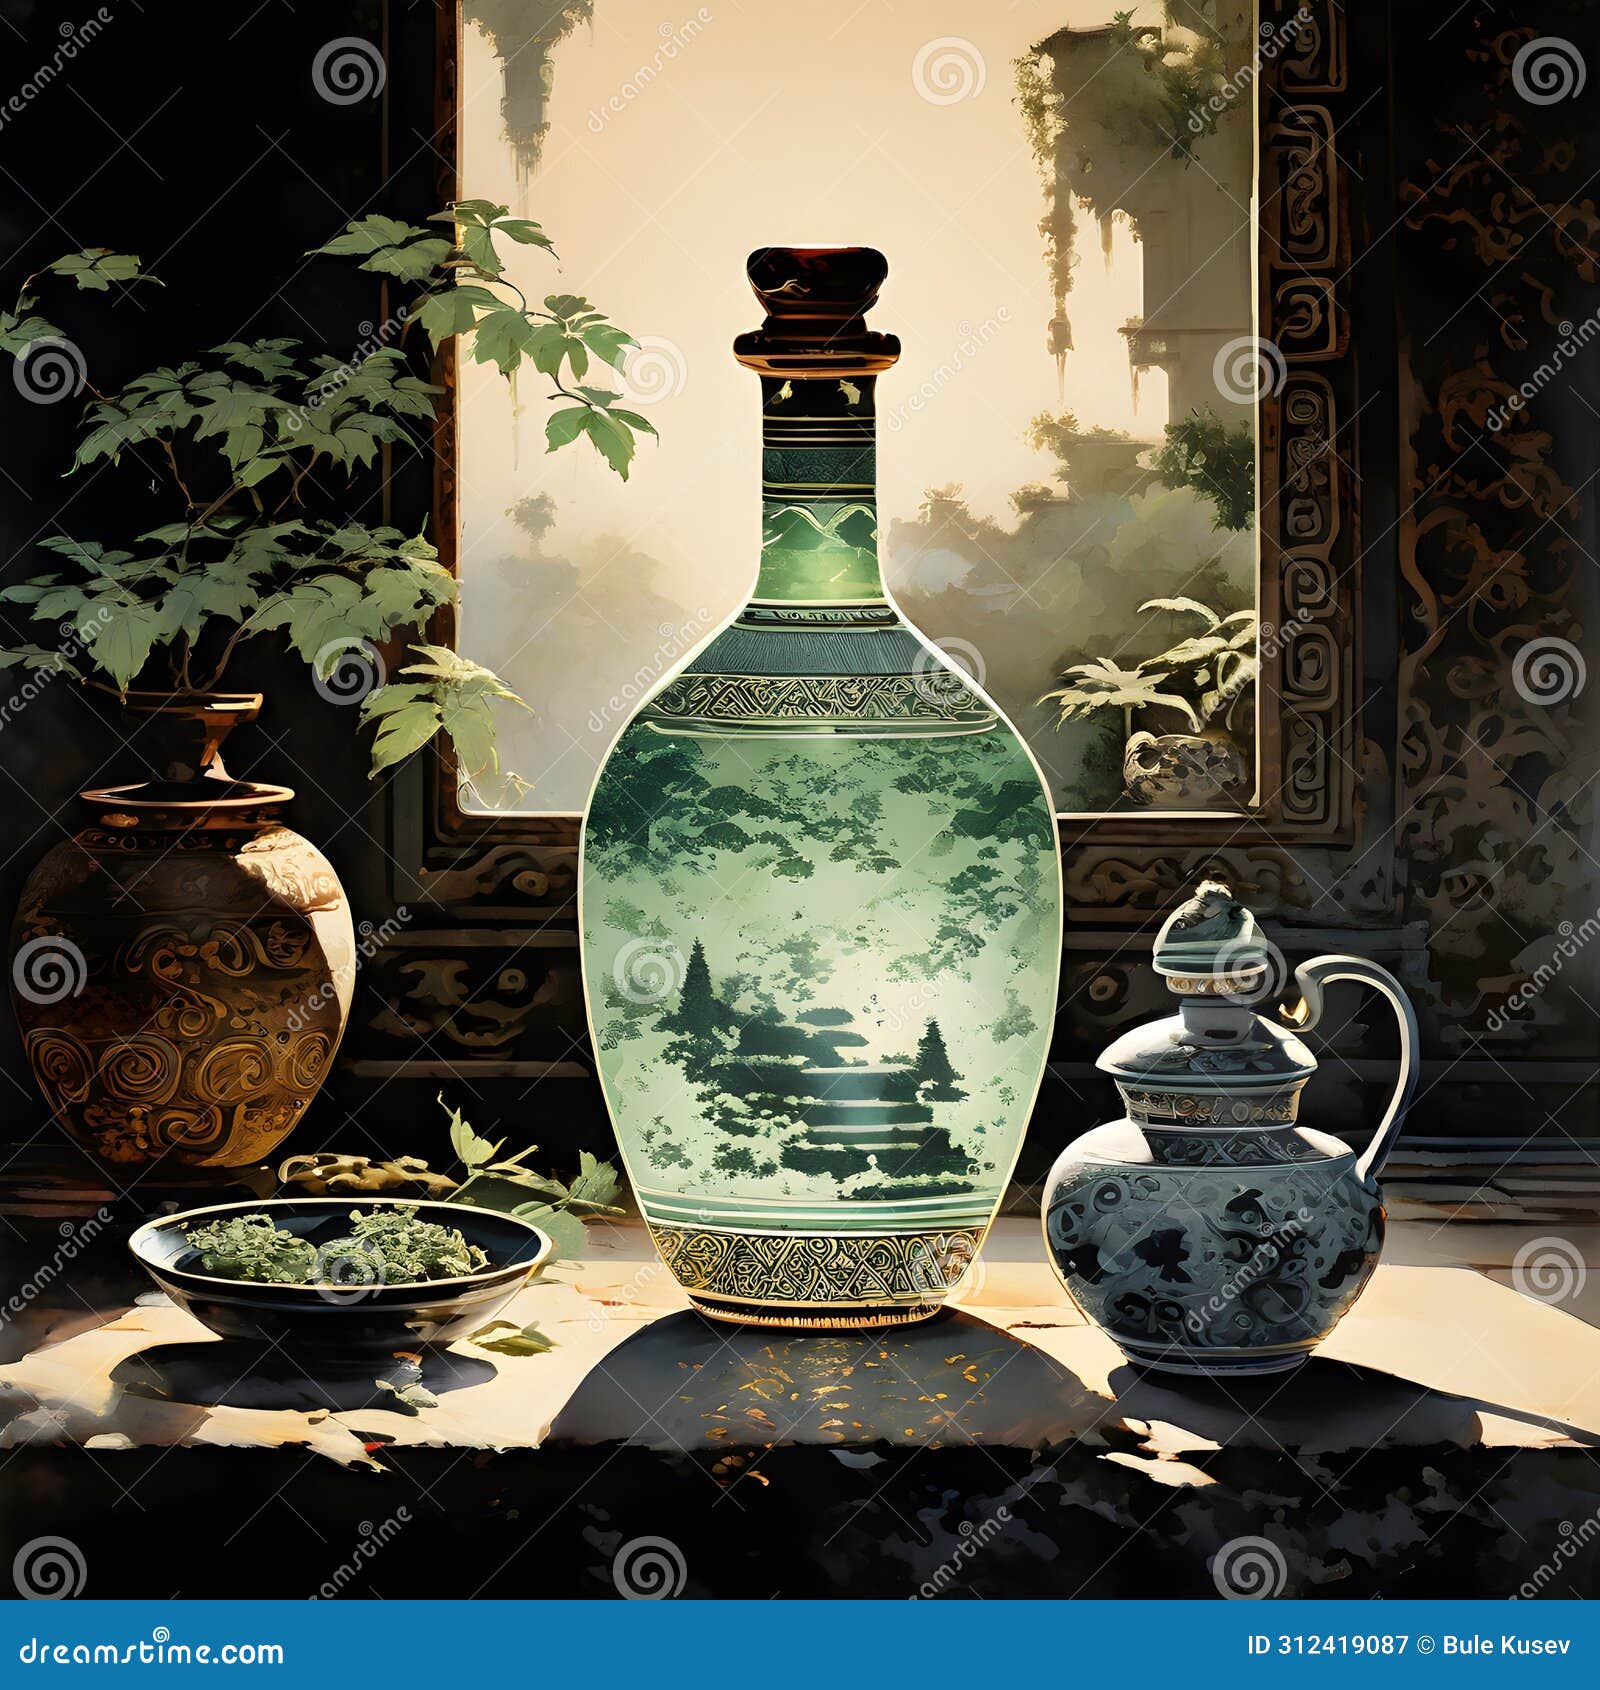 in dynasty era painting style, a bottle of mint oil is depicted with intricate and ornate patterns that encase the vessel.